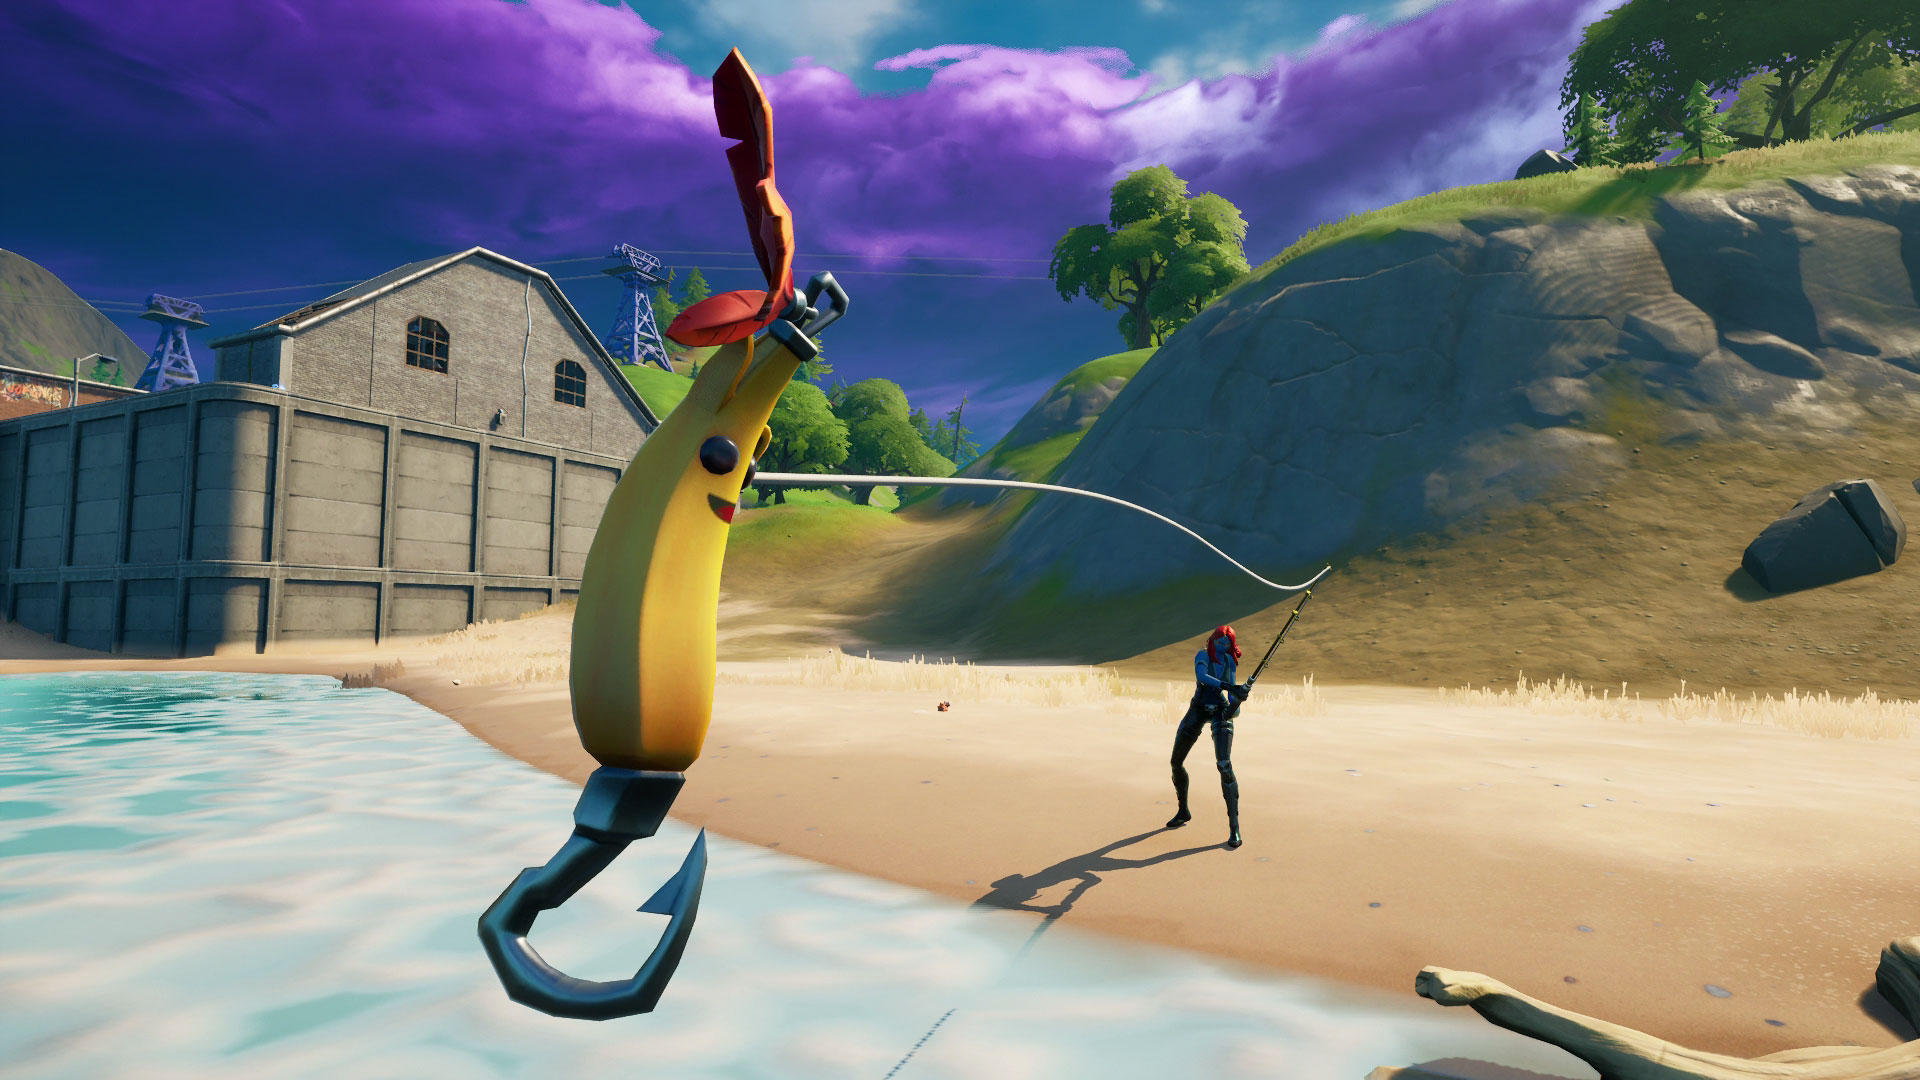 Fortnite Pro fishing rod: How to get the best fishing rod on the